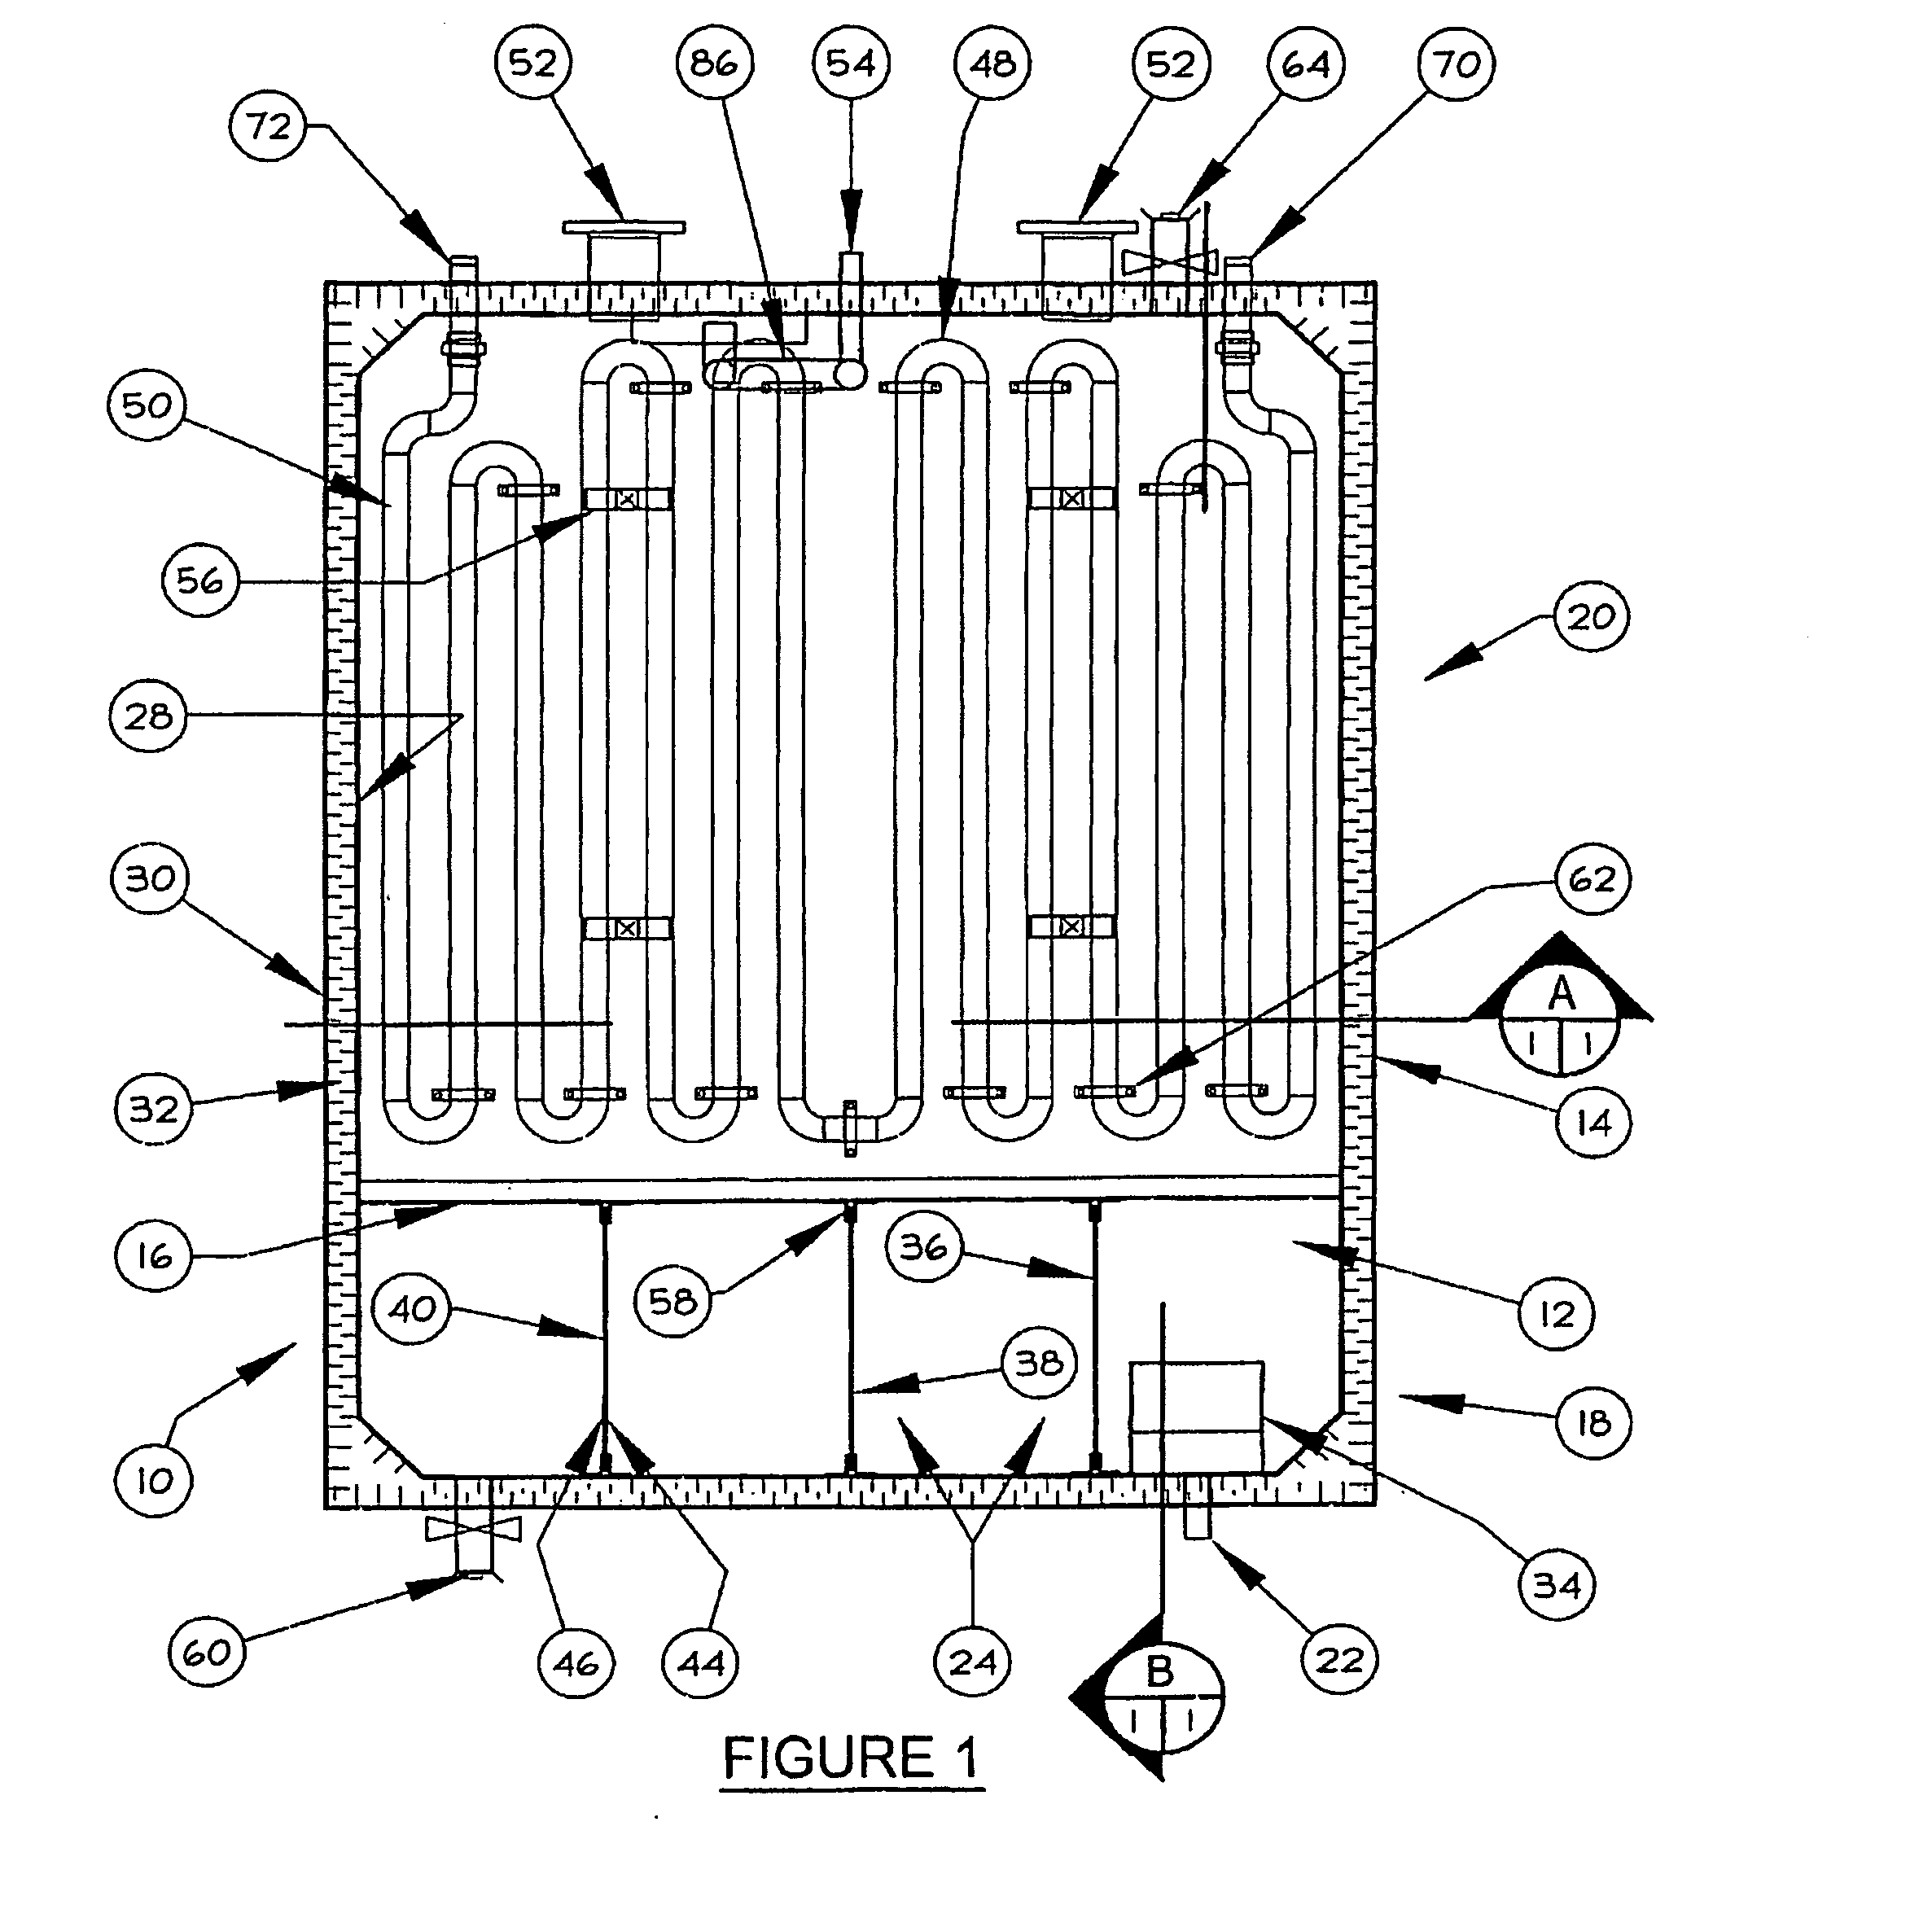 Settling and evaporation tank apparatus, method and system